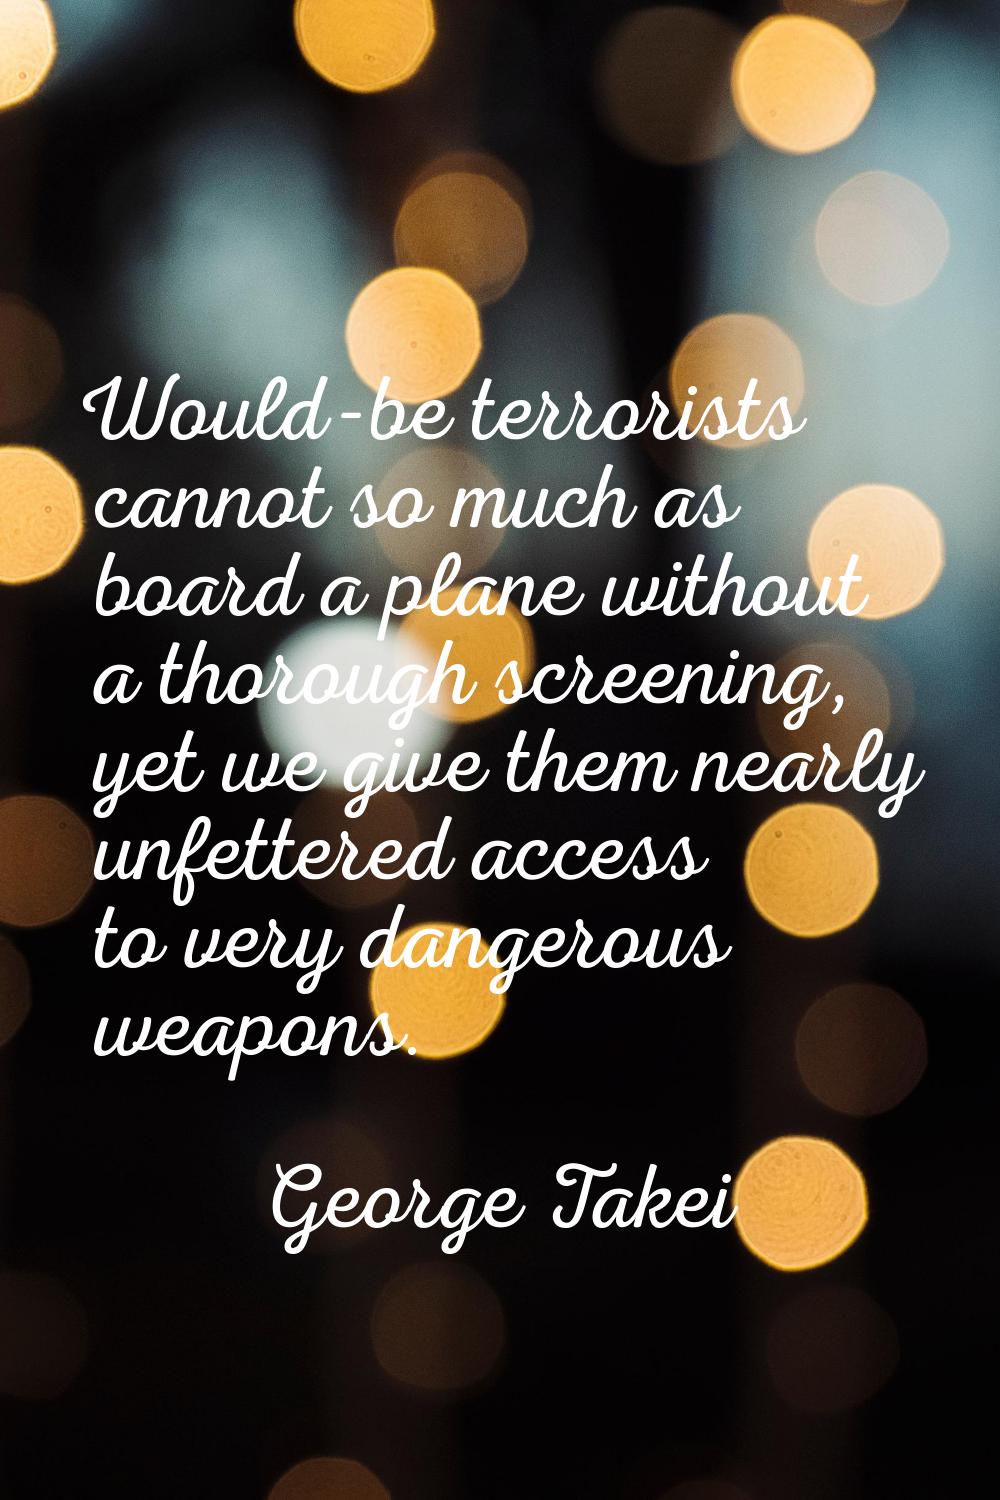 Would-be terrorists cannot so much as board a plane without a thorough screening, yet we give them 